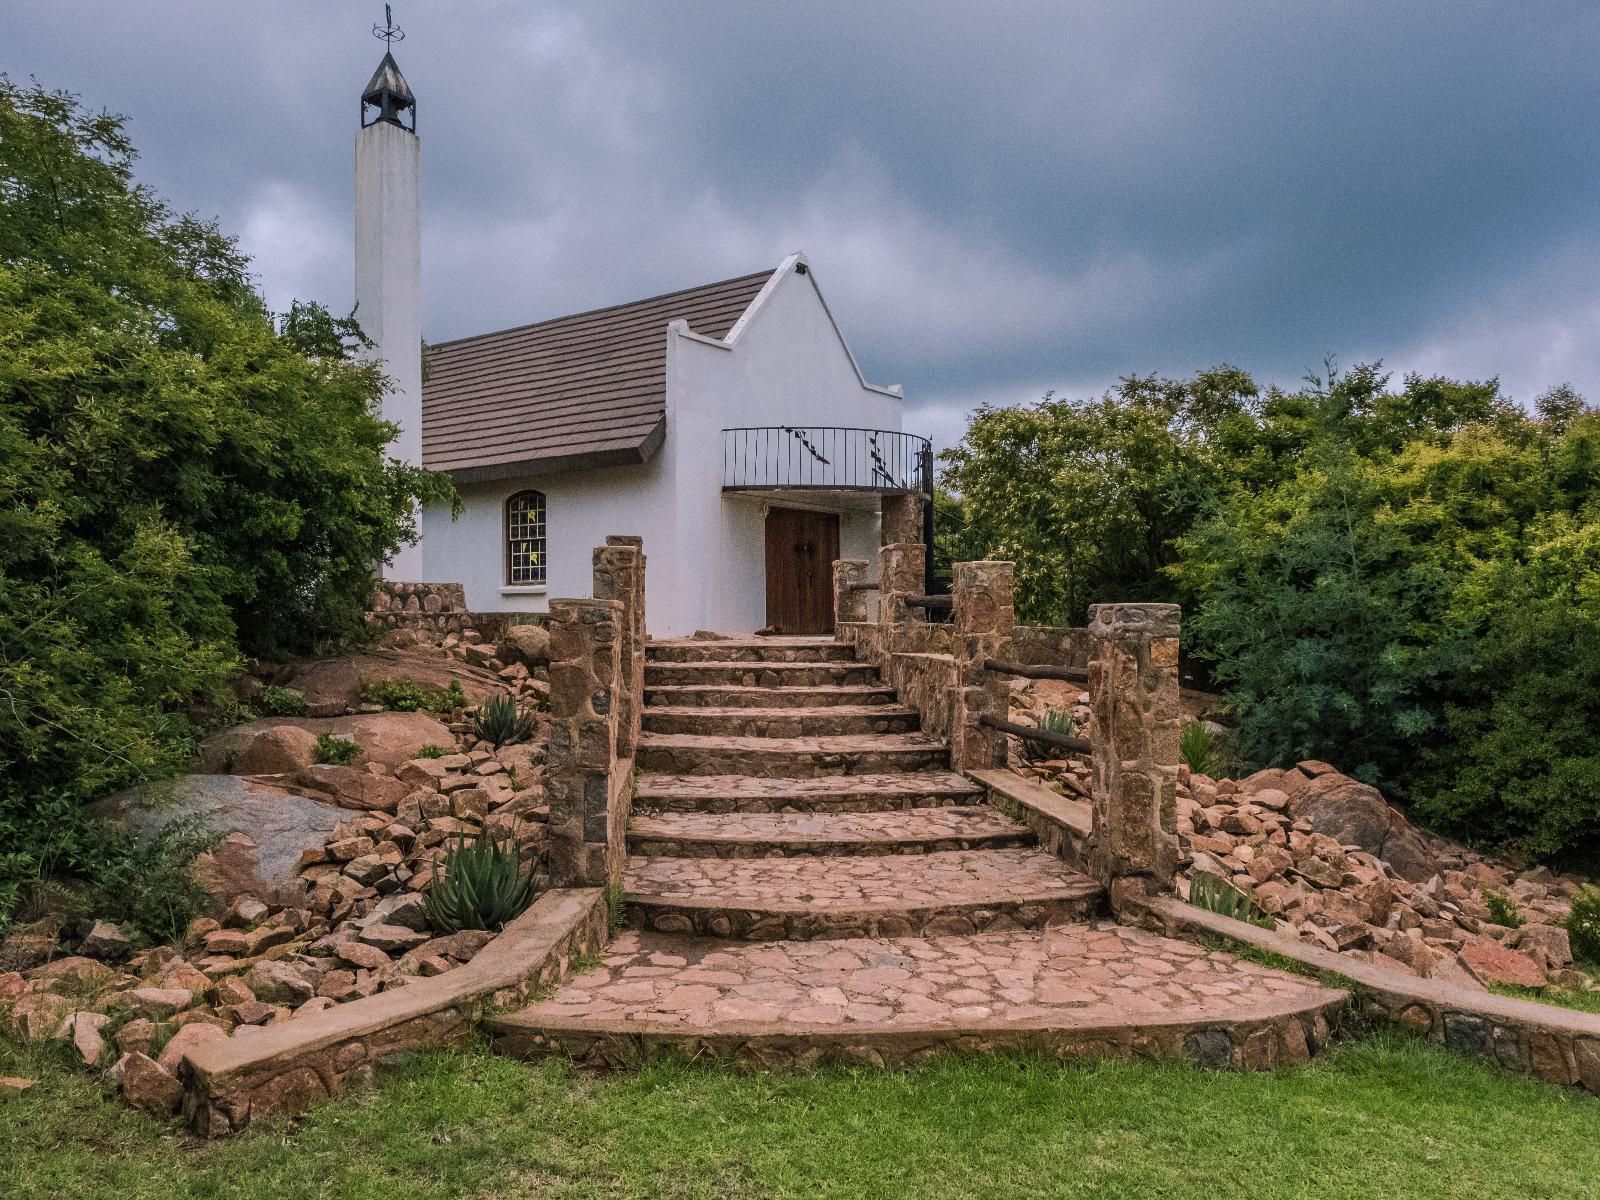 Riverman Cabin Dullstroom Mpumalanga South Africa Stairs, Architecture, Church, Building, Religion